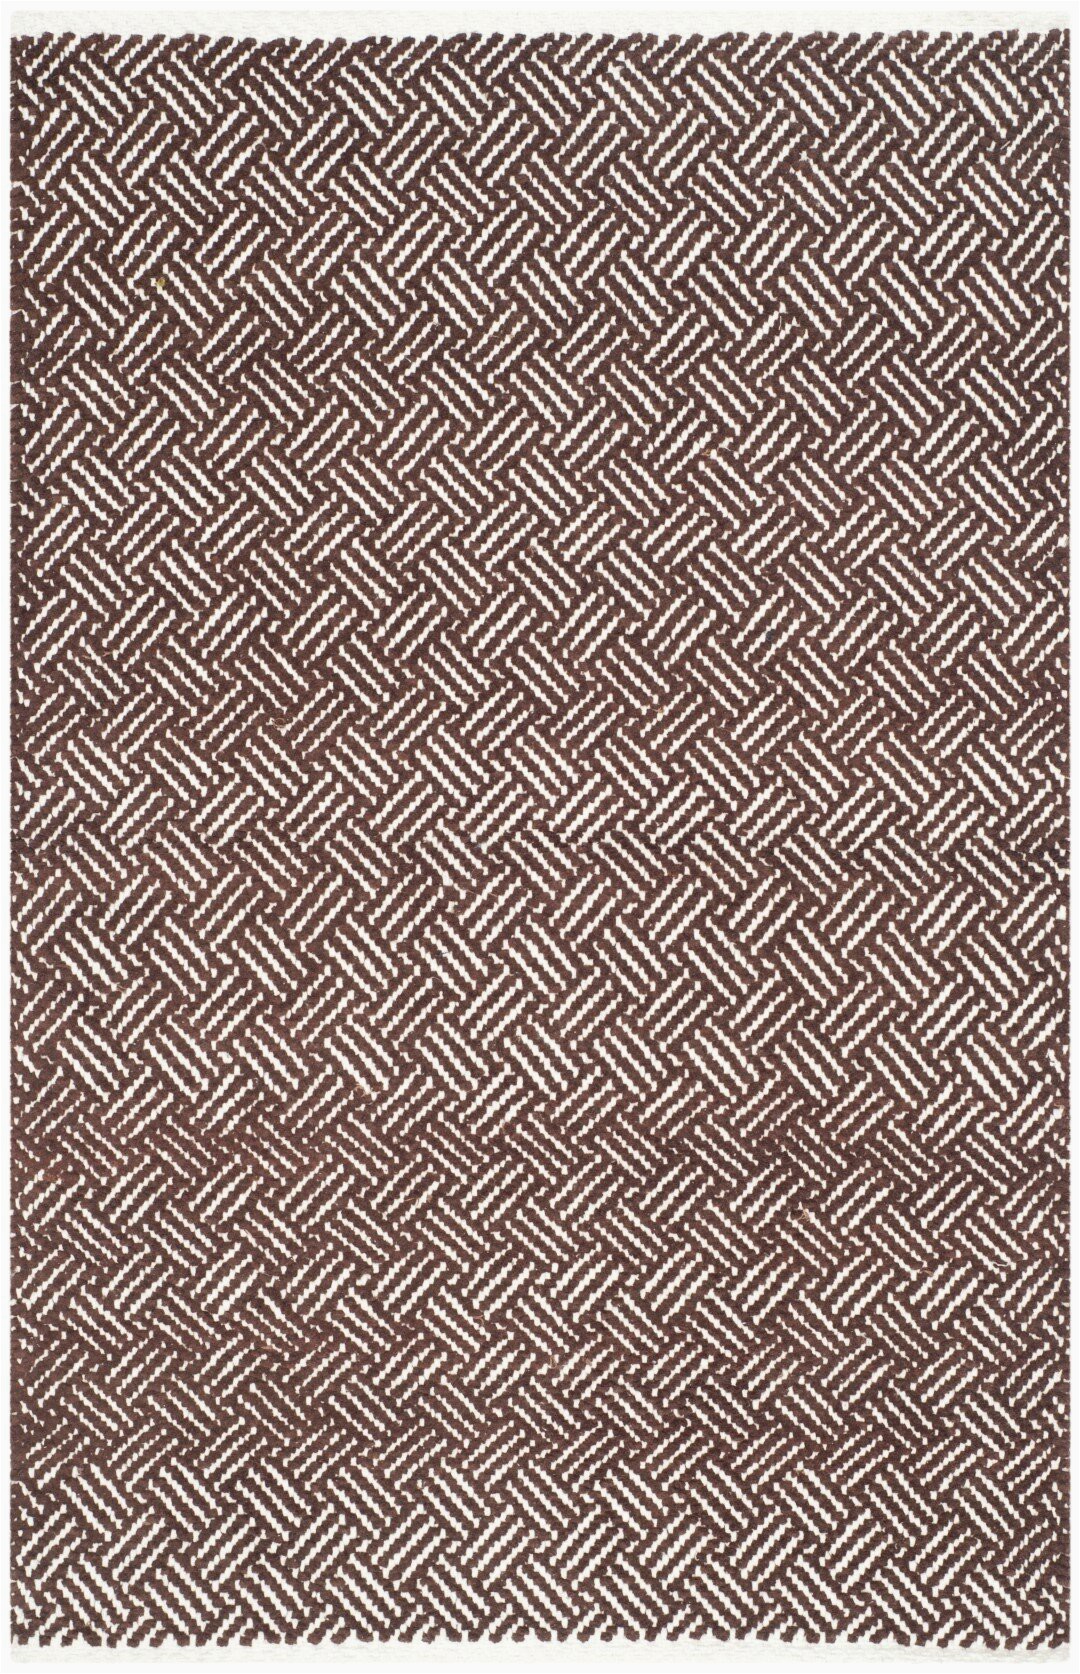 andrea hand tufted cotton brown area rug